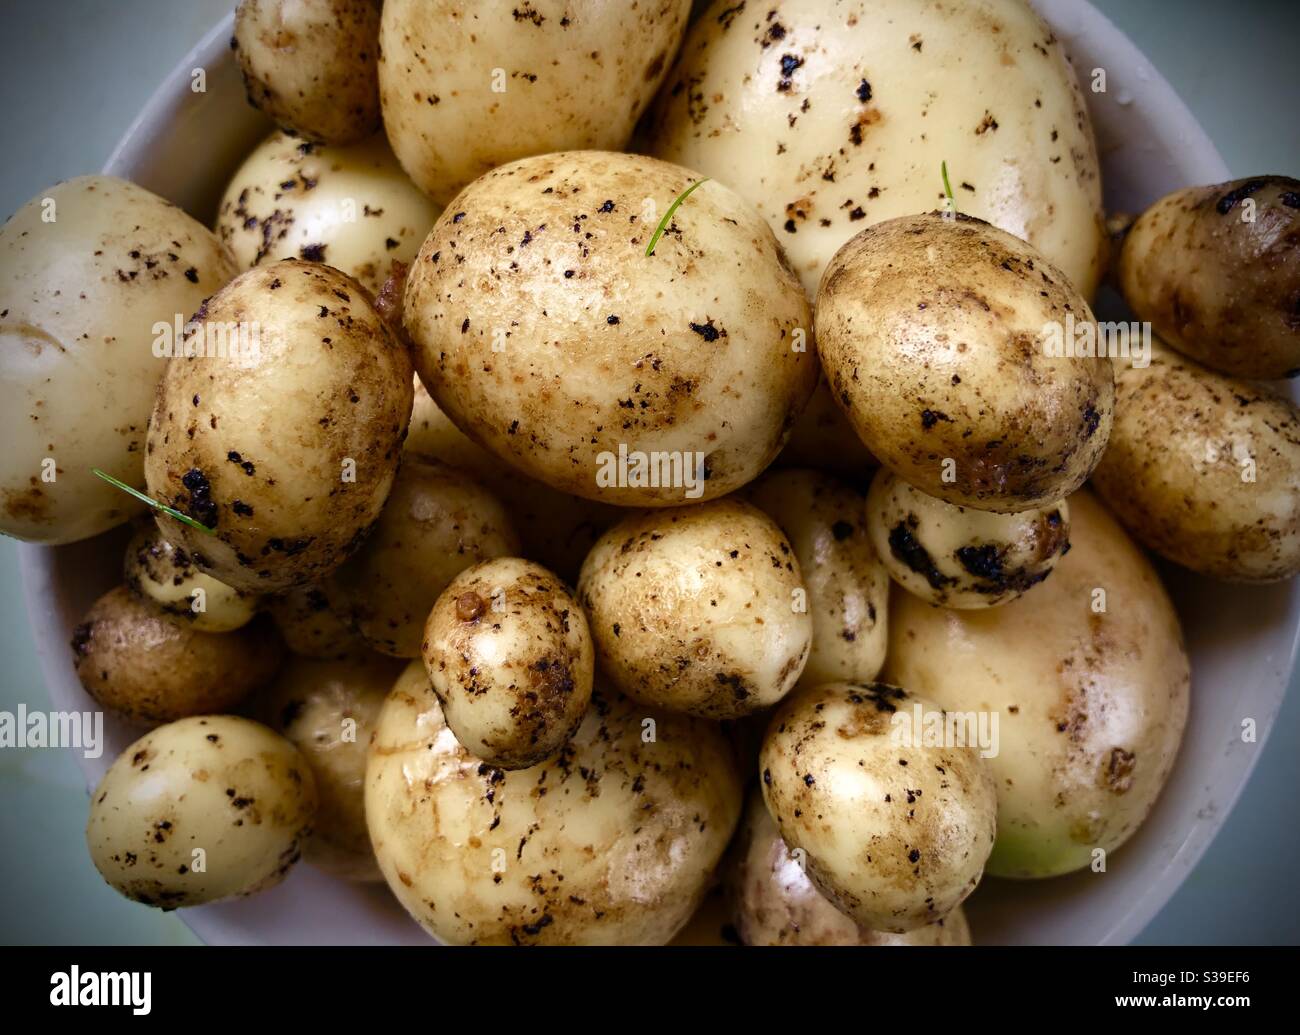 Freshly picked organic new season potatoes, loosely washed in a bowl, Dublin, Ireland Stock Photo